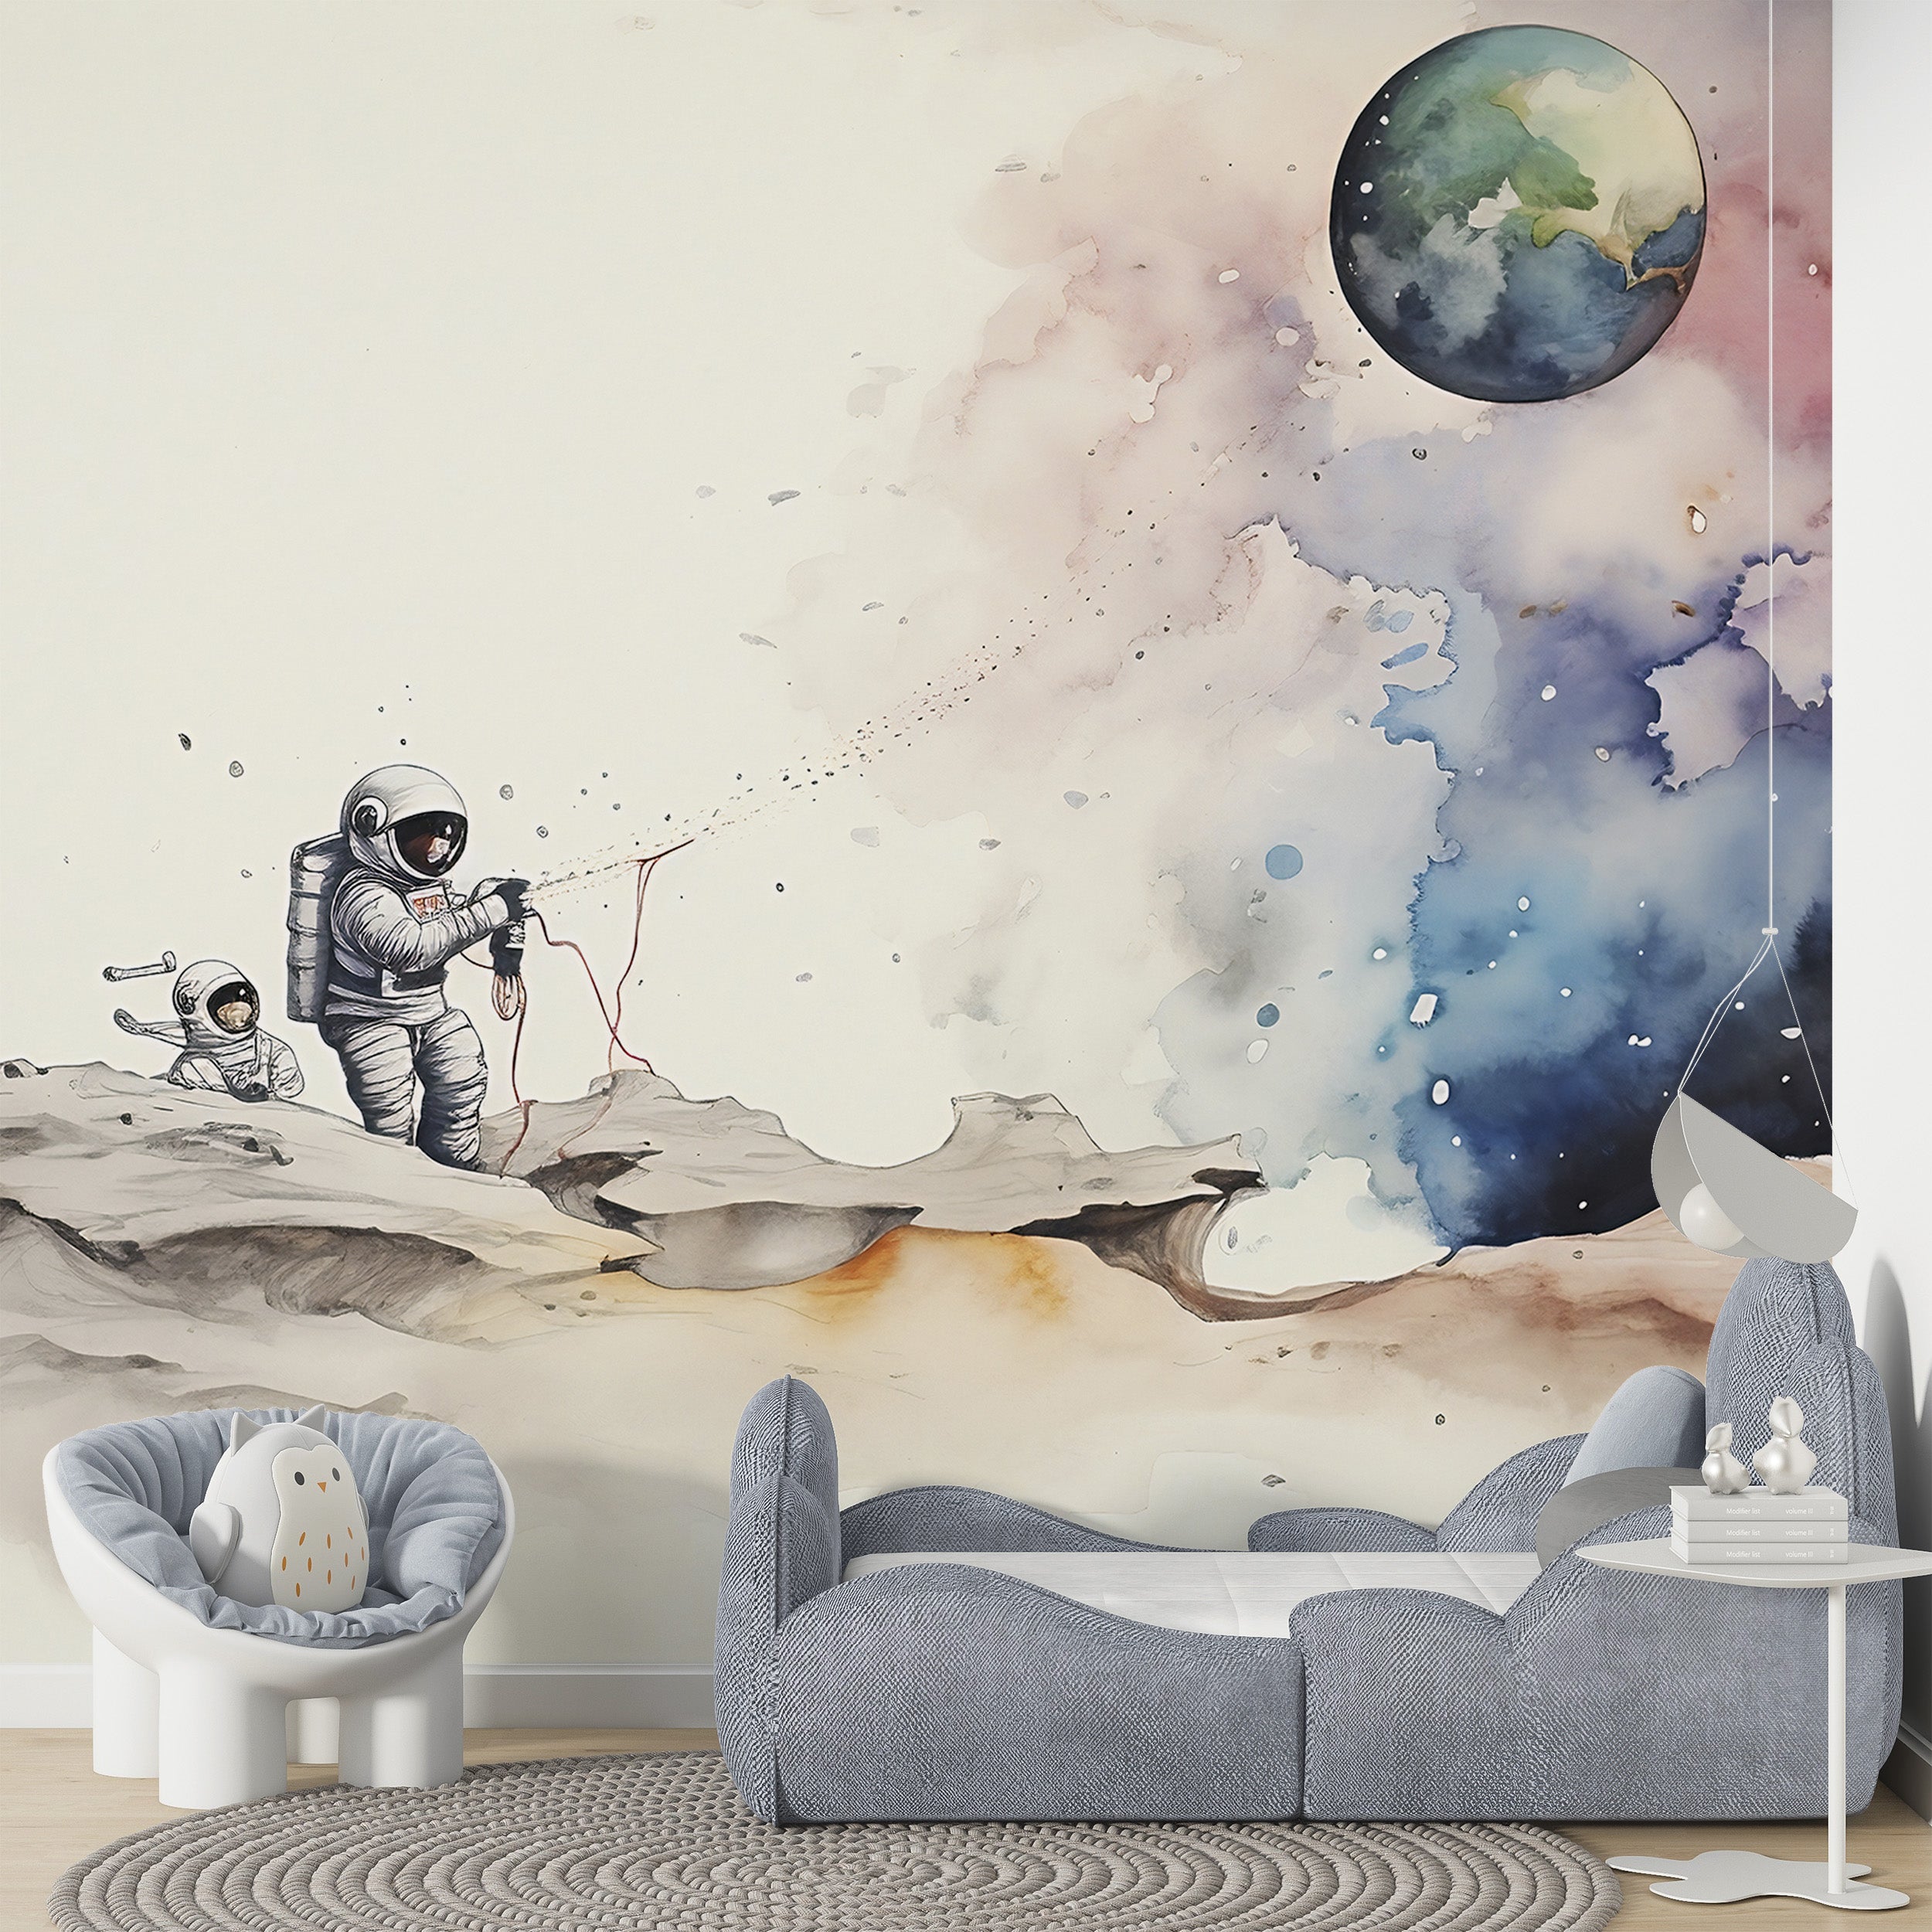 Effortless Application of Space-Themed Decor